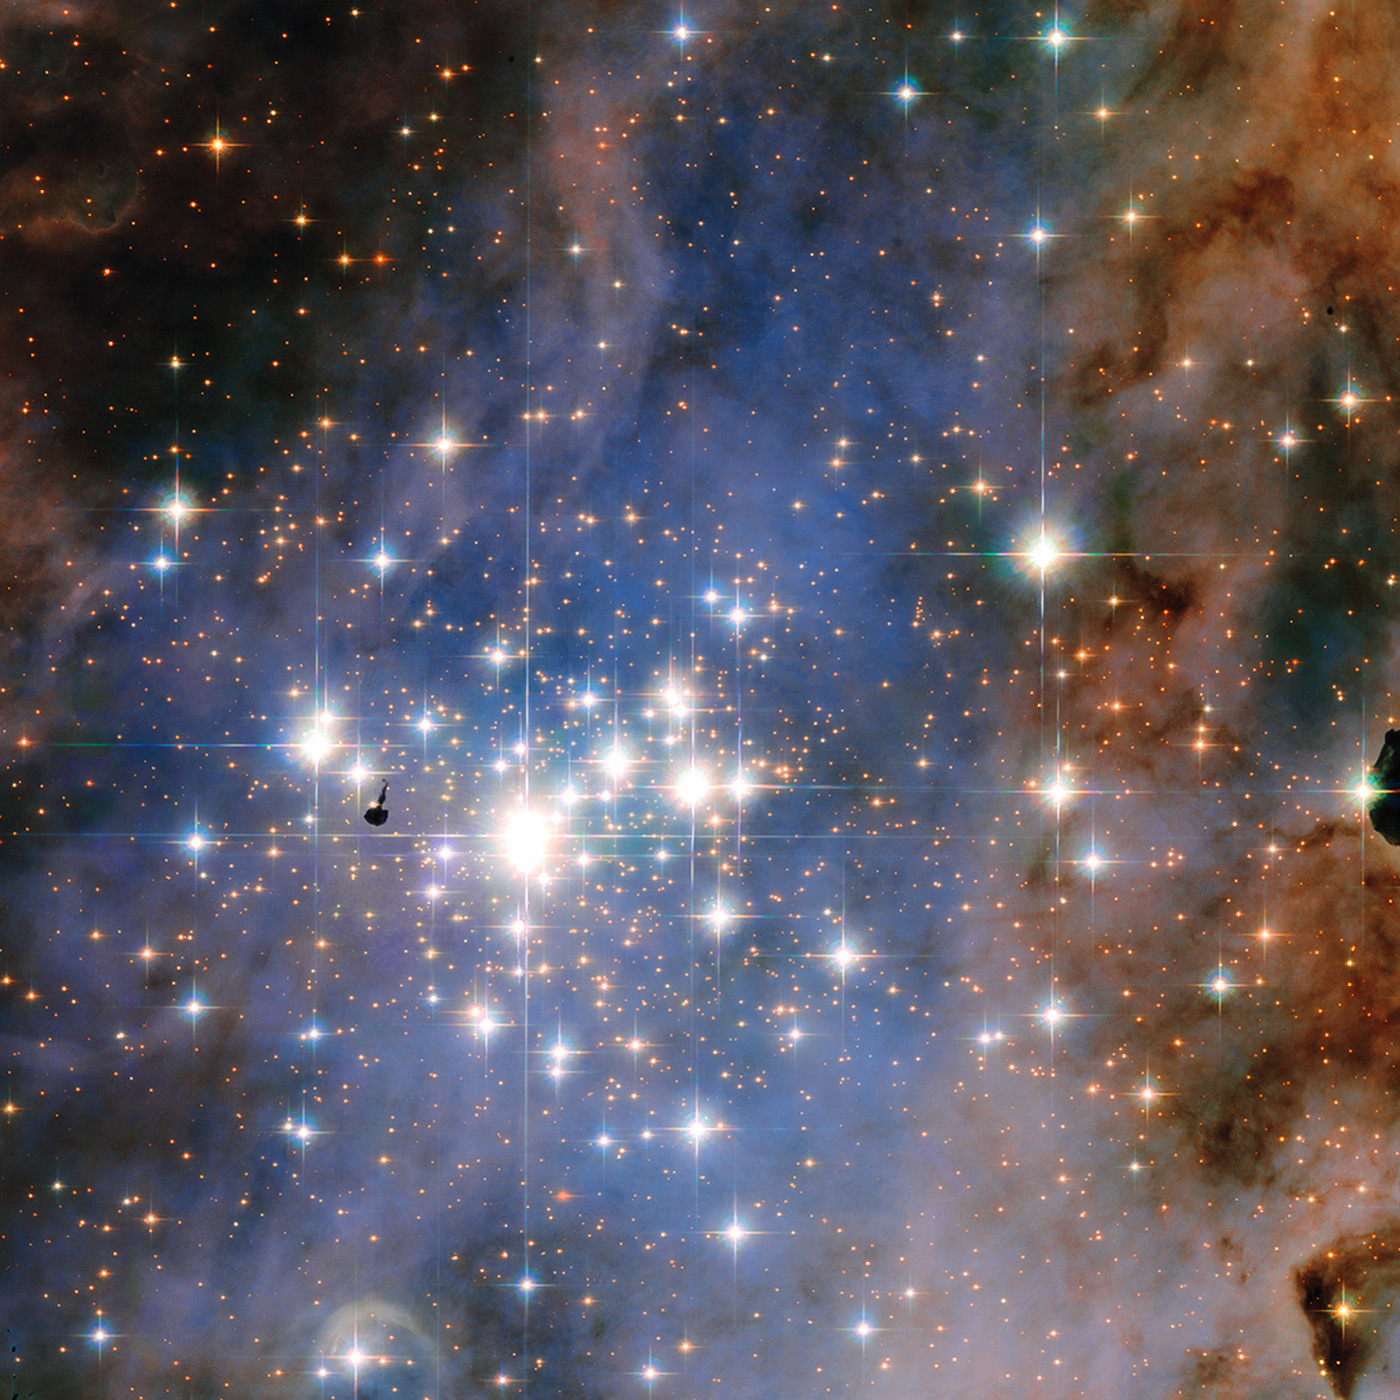 Hubble shows some of the galaxy&#039;s biggest, brightest stars